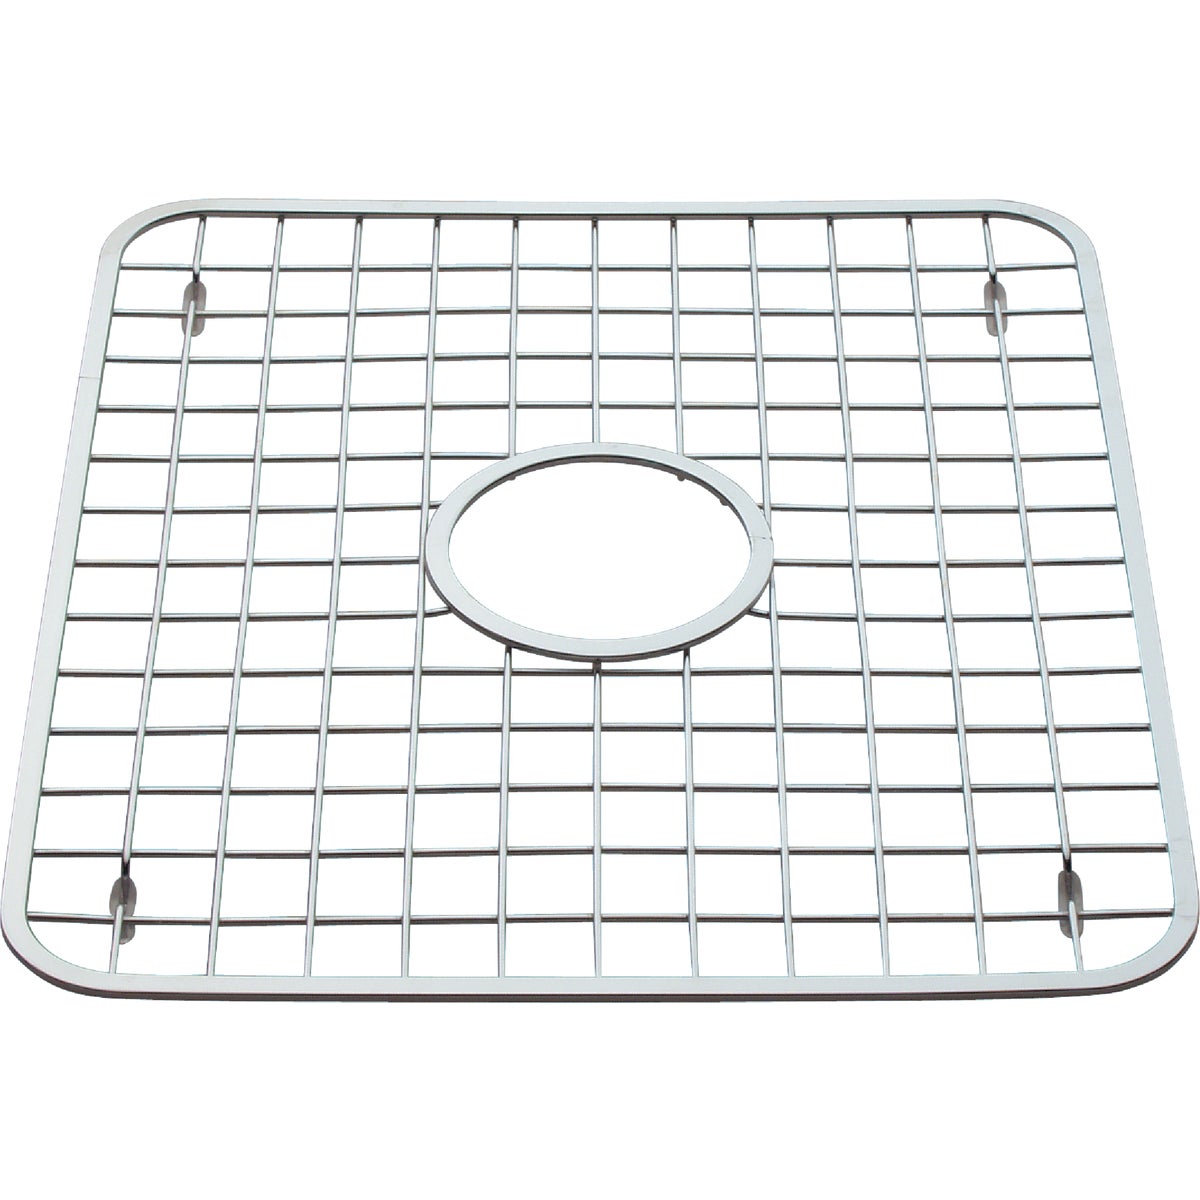 Item 606151, SinkWorks regular sink grid with hole in center. 18/8 stainless steel.